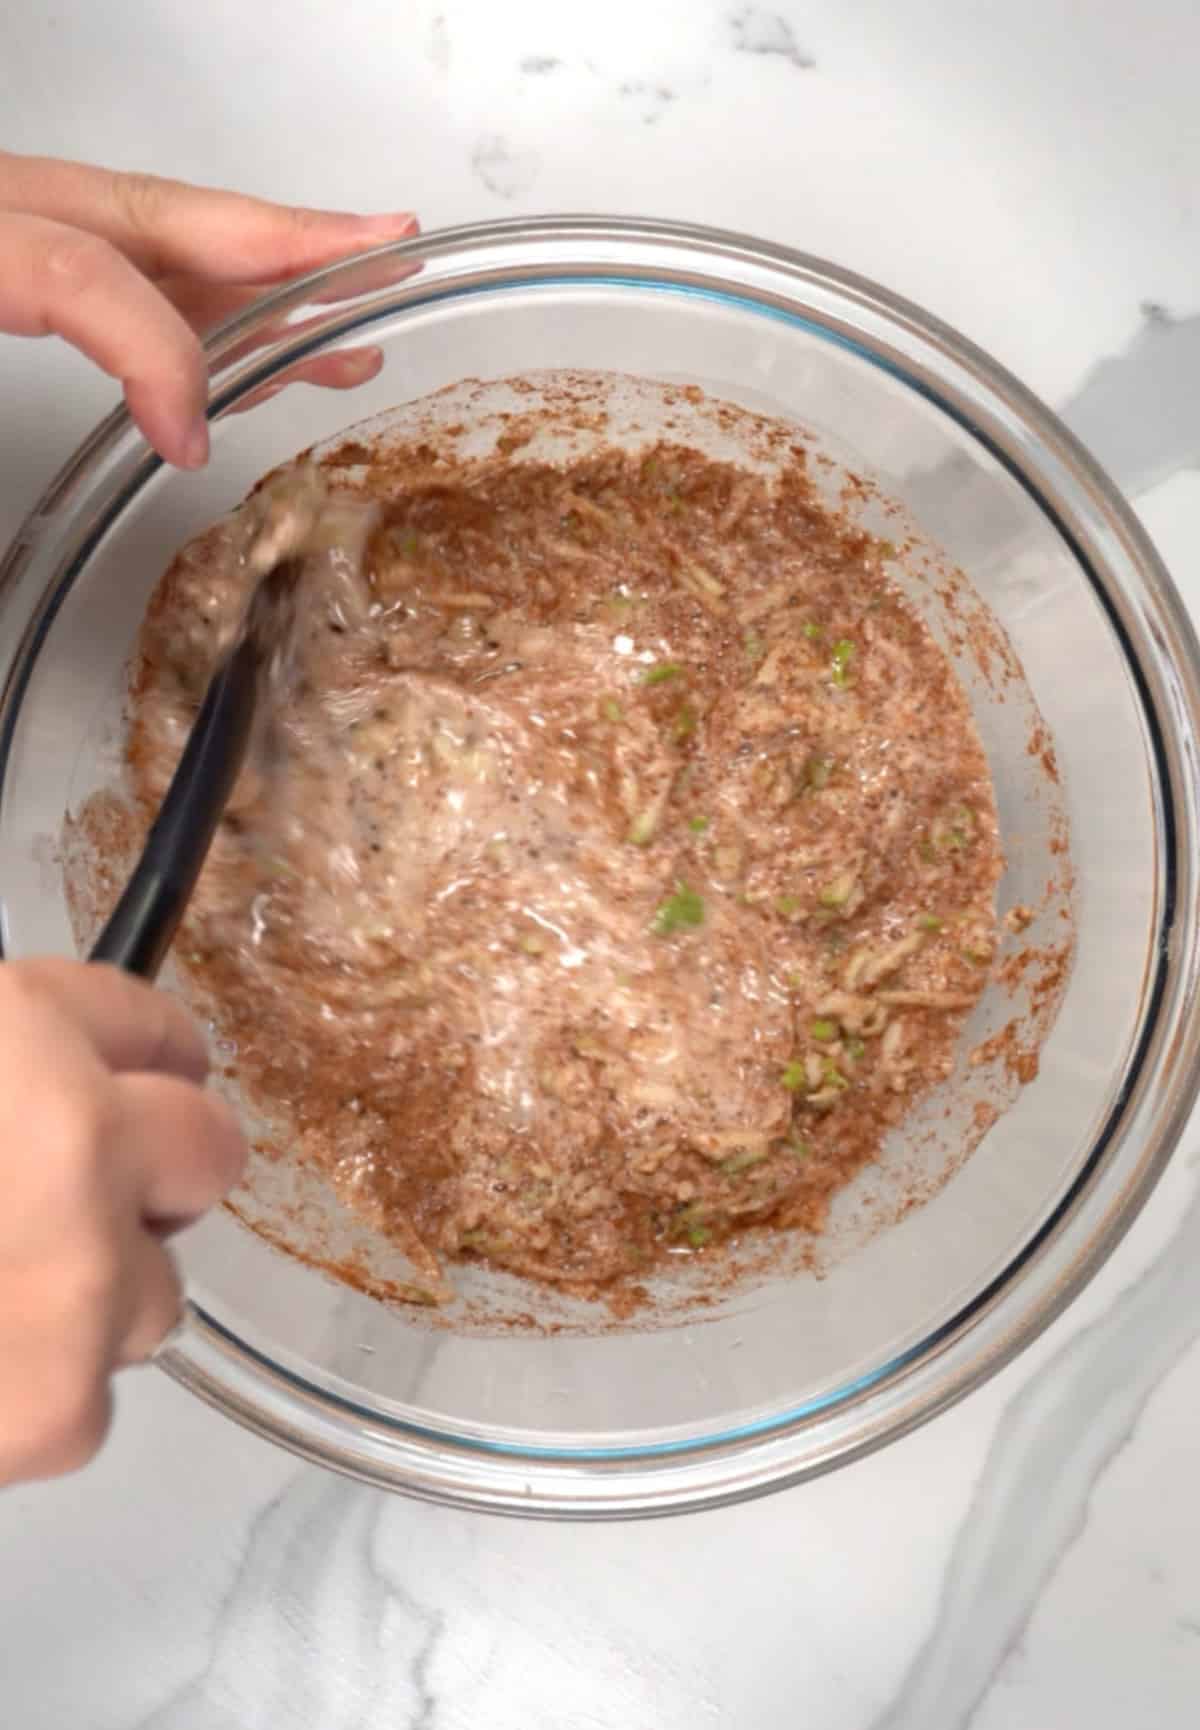 a hand mixing brownish wet ingredients in a glass bowl